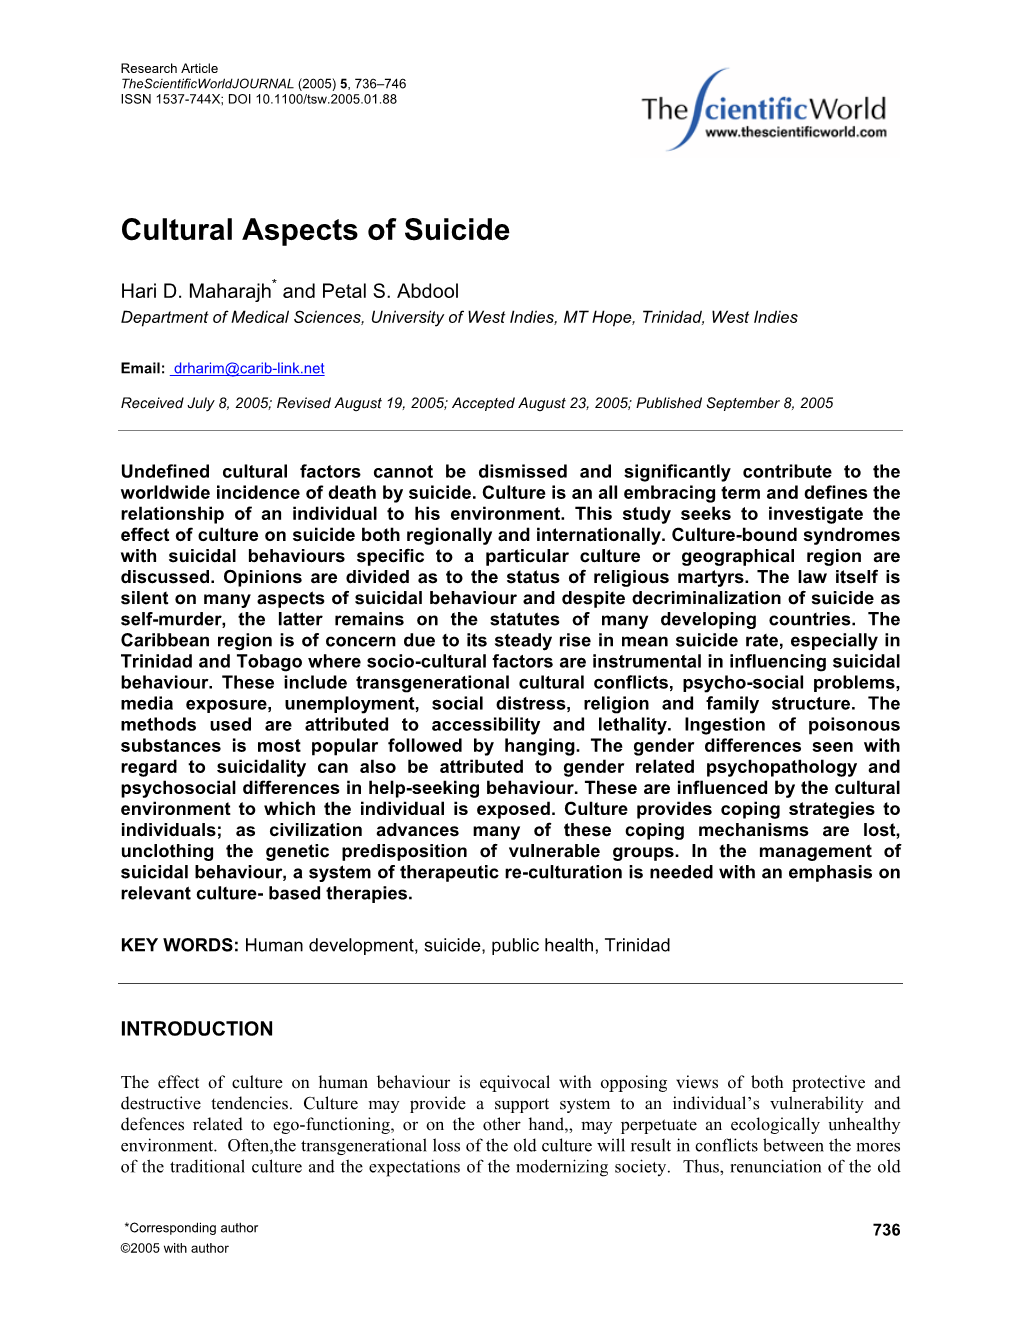 Cultural Aspects of Suicide